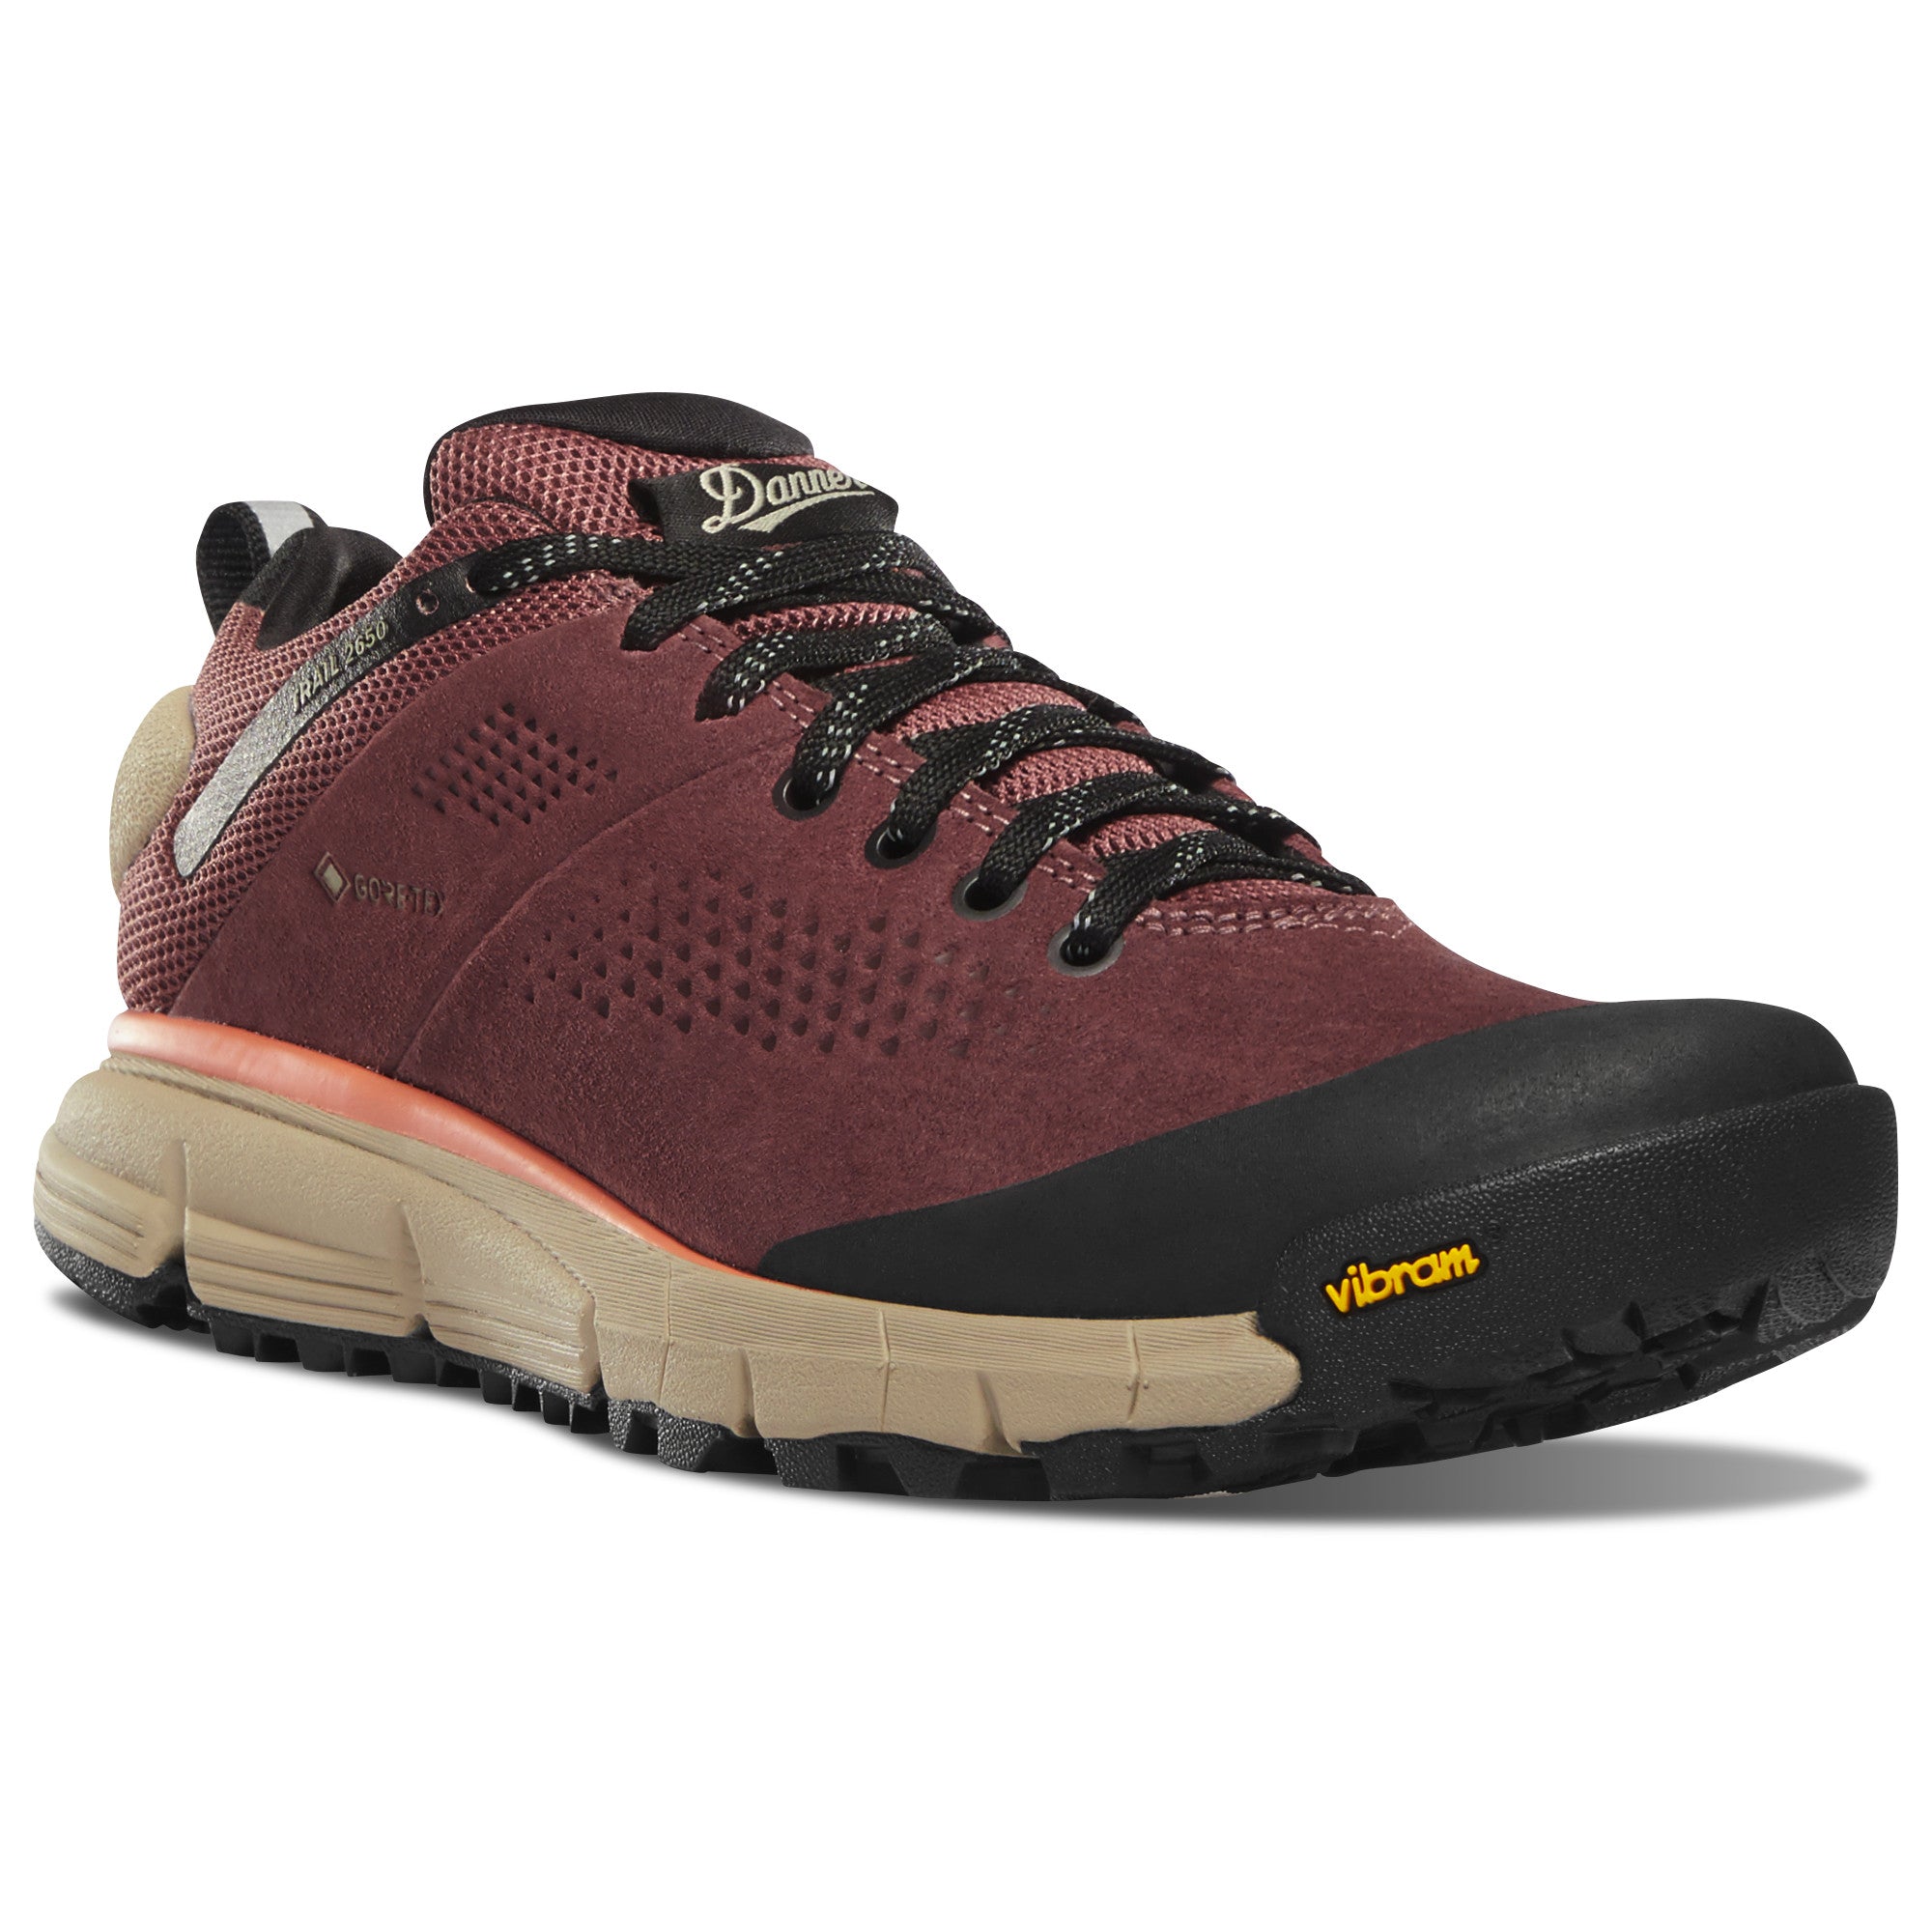 Danner Women's Trail 2650 3" Gore-Tex Waterproof Hiking Shoe in Mauve/Salmon from the side